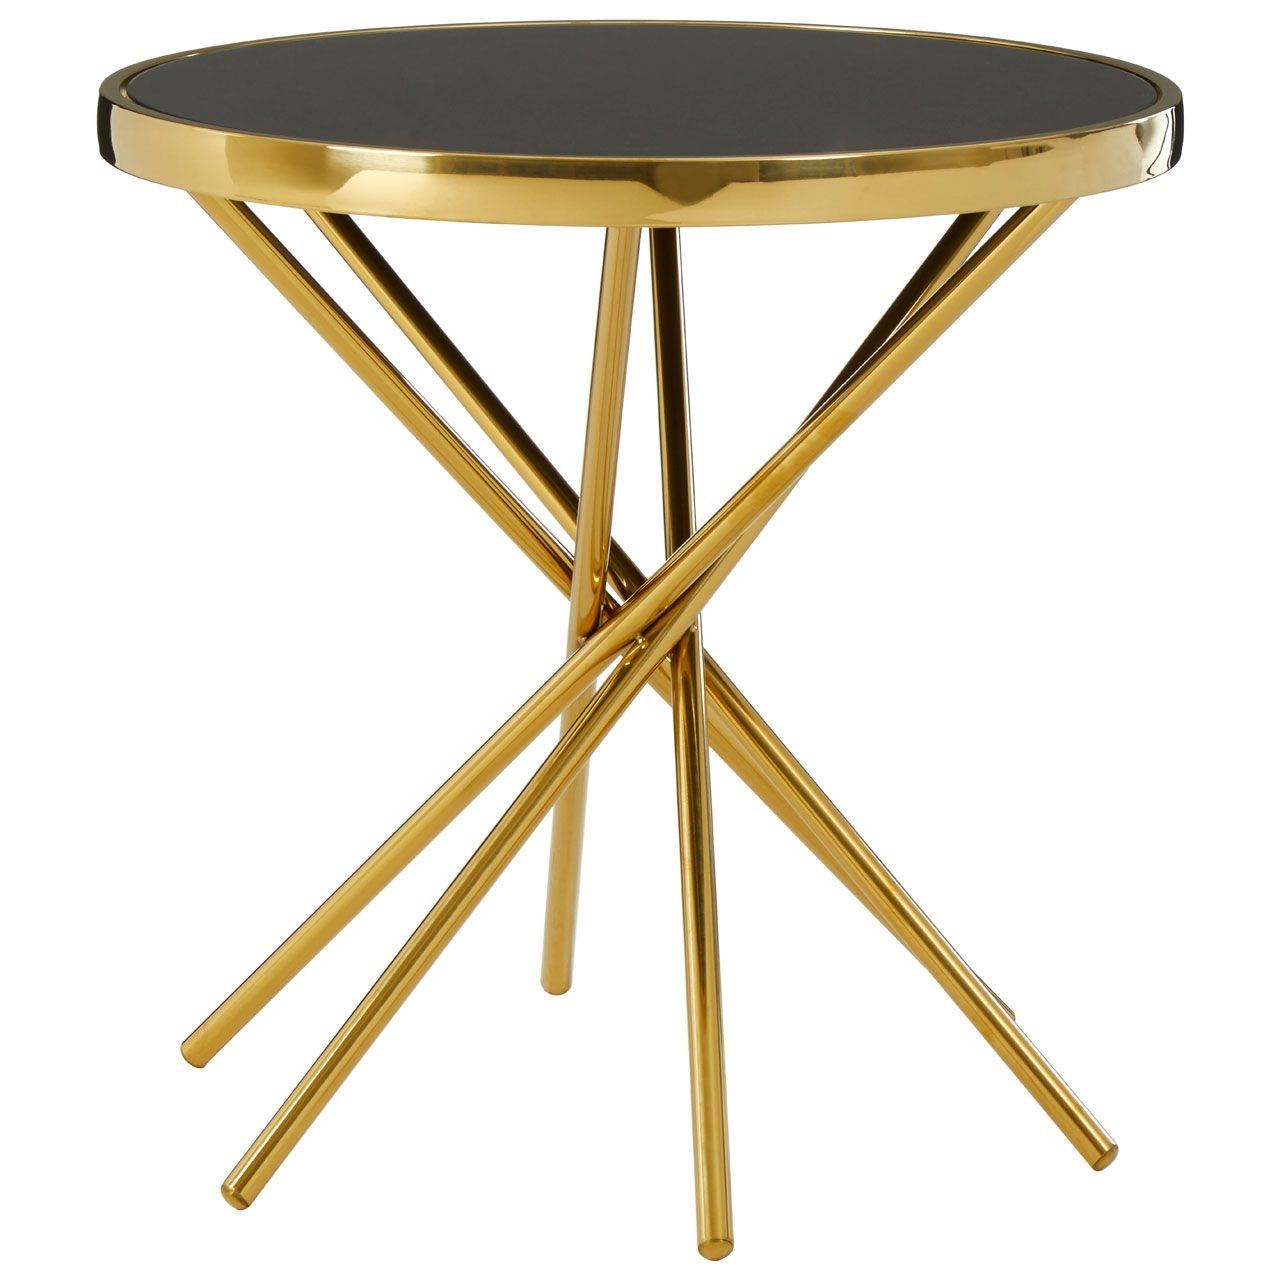 Tula Round Black Glass Side Table With Gold Stainless Steel Base